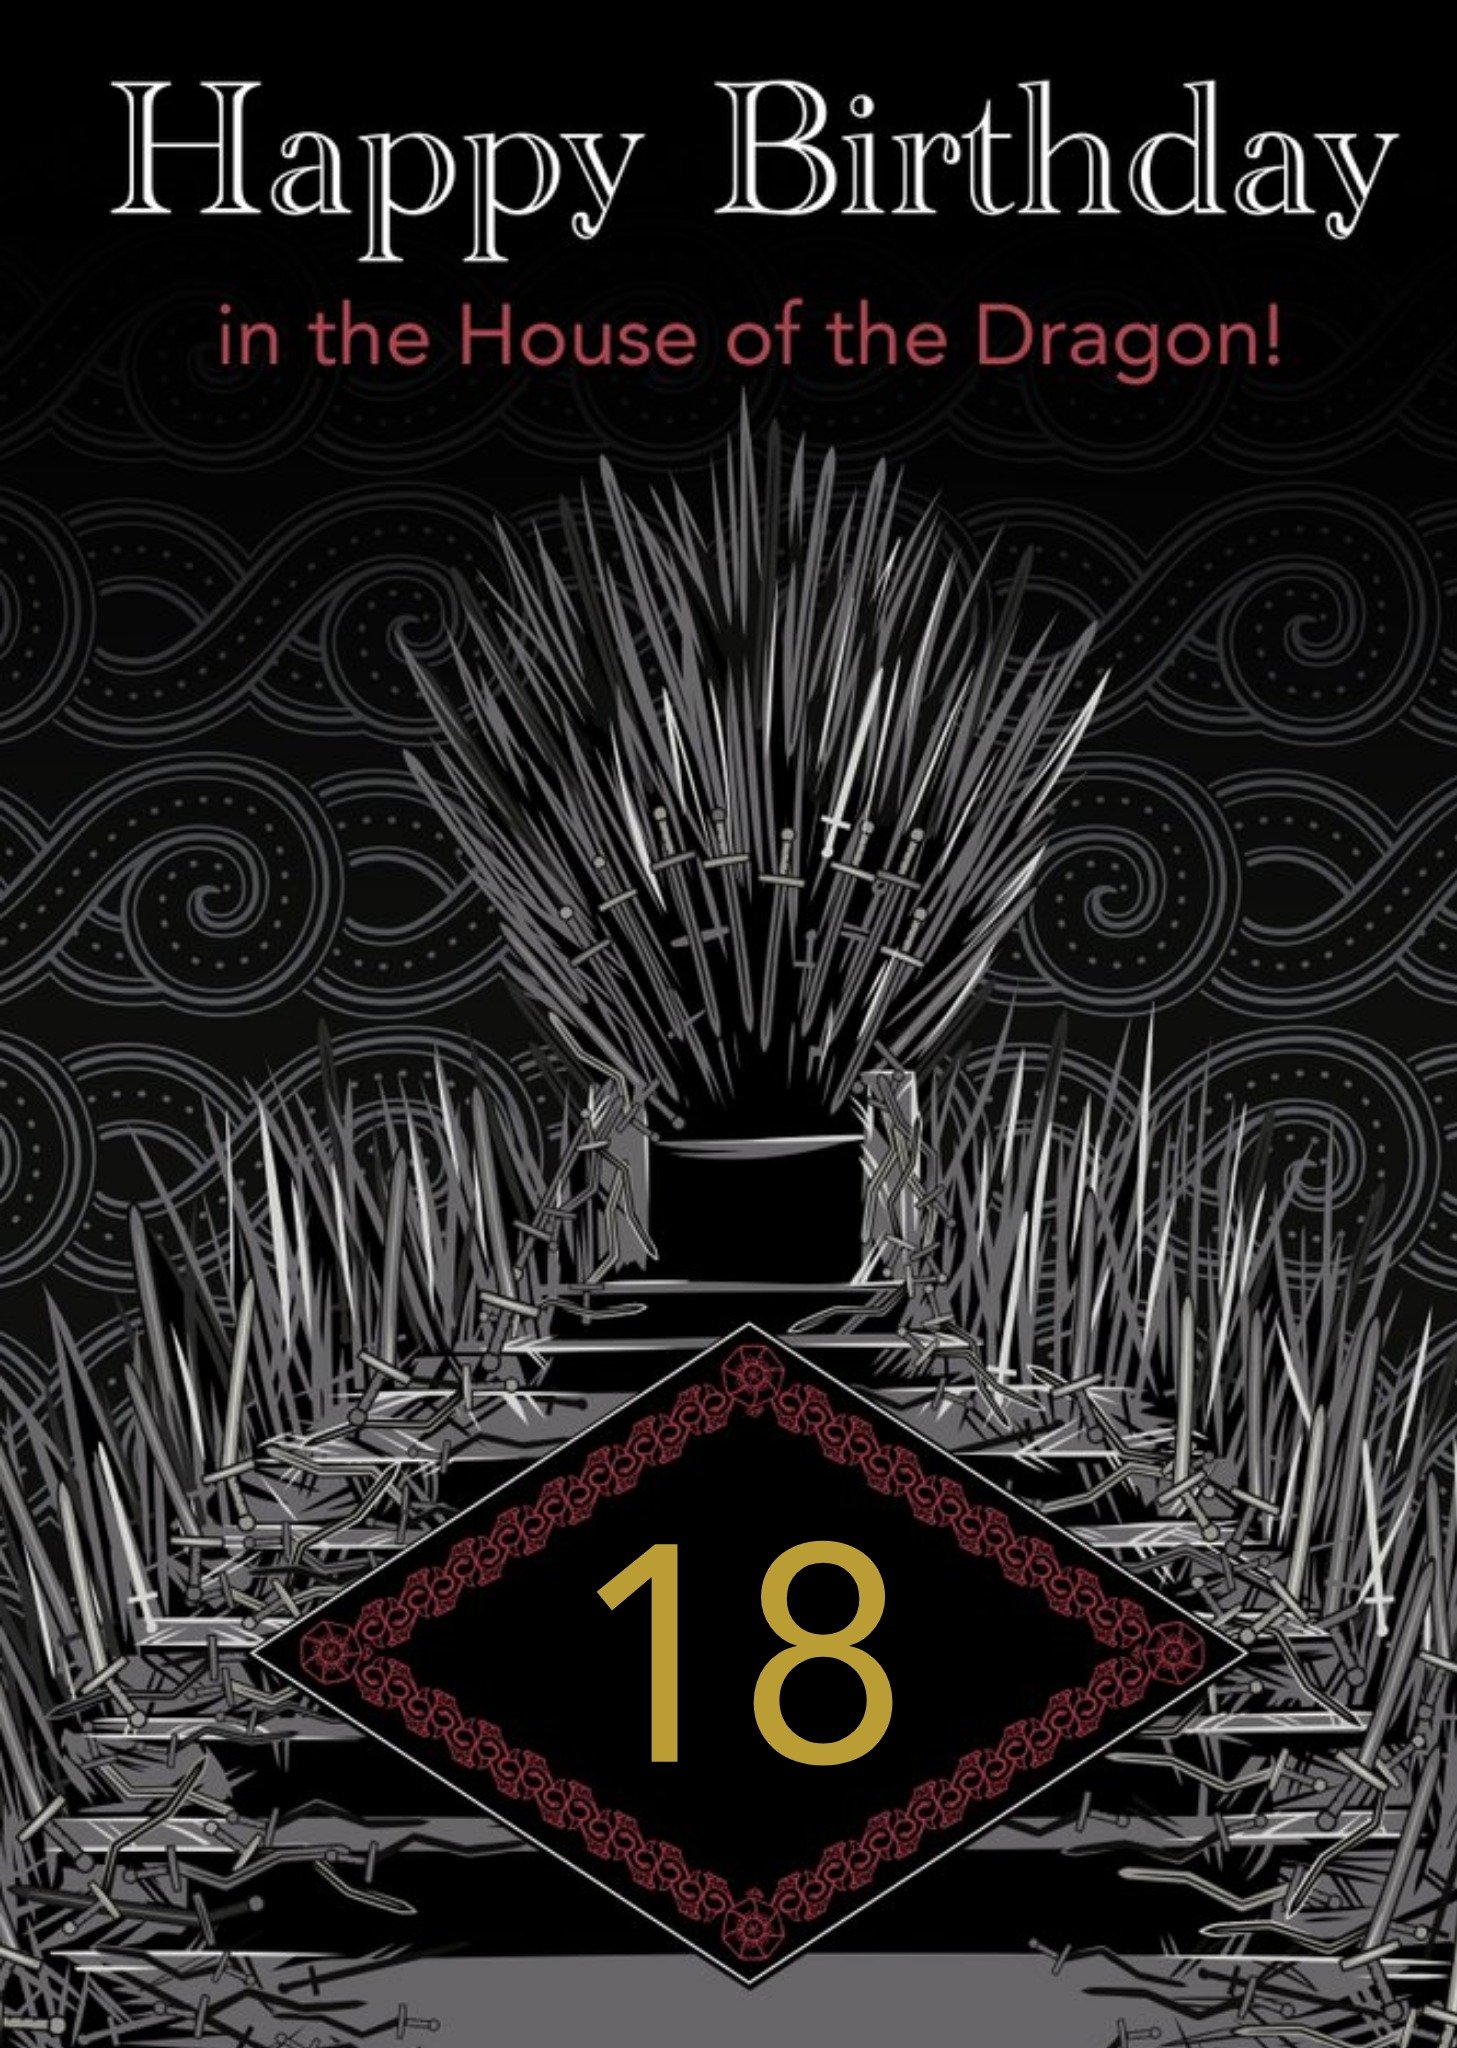 Game Of thrones House Of the Dragon 18th Birthday Card Ecard